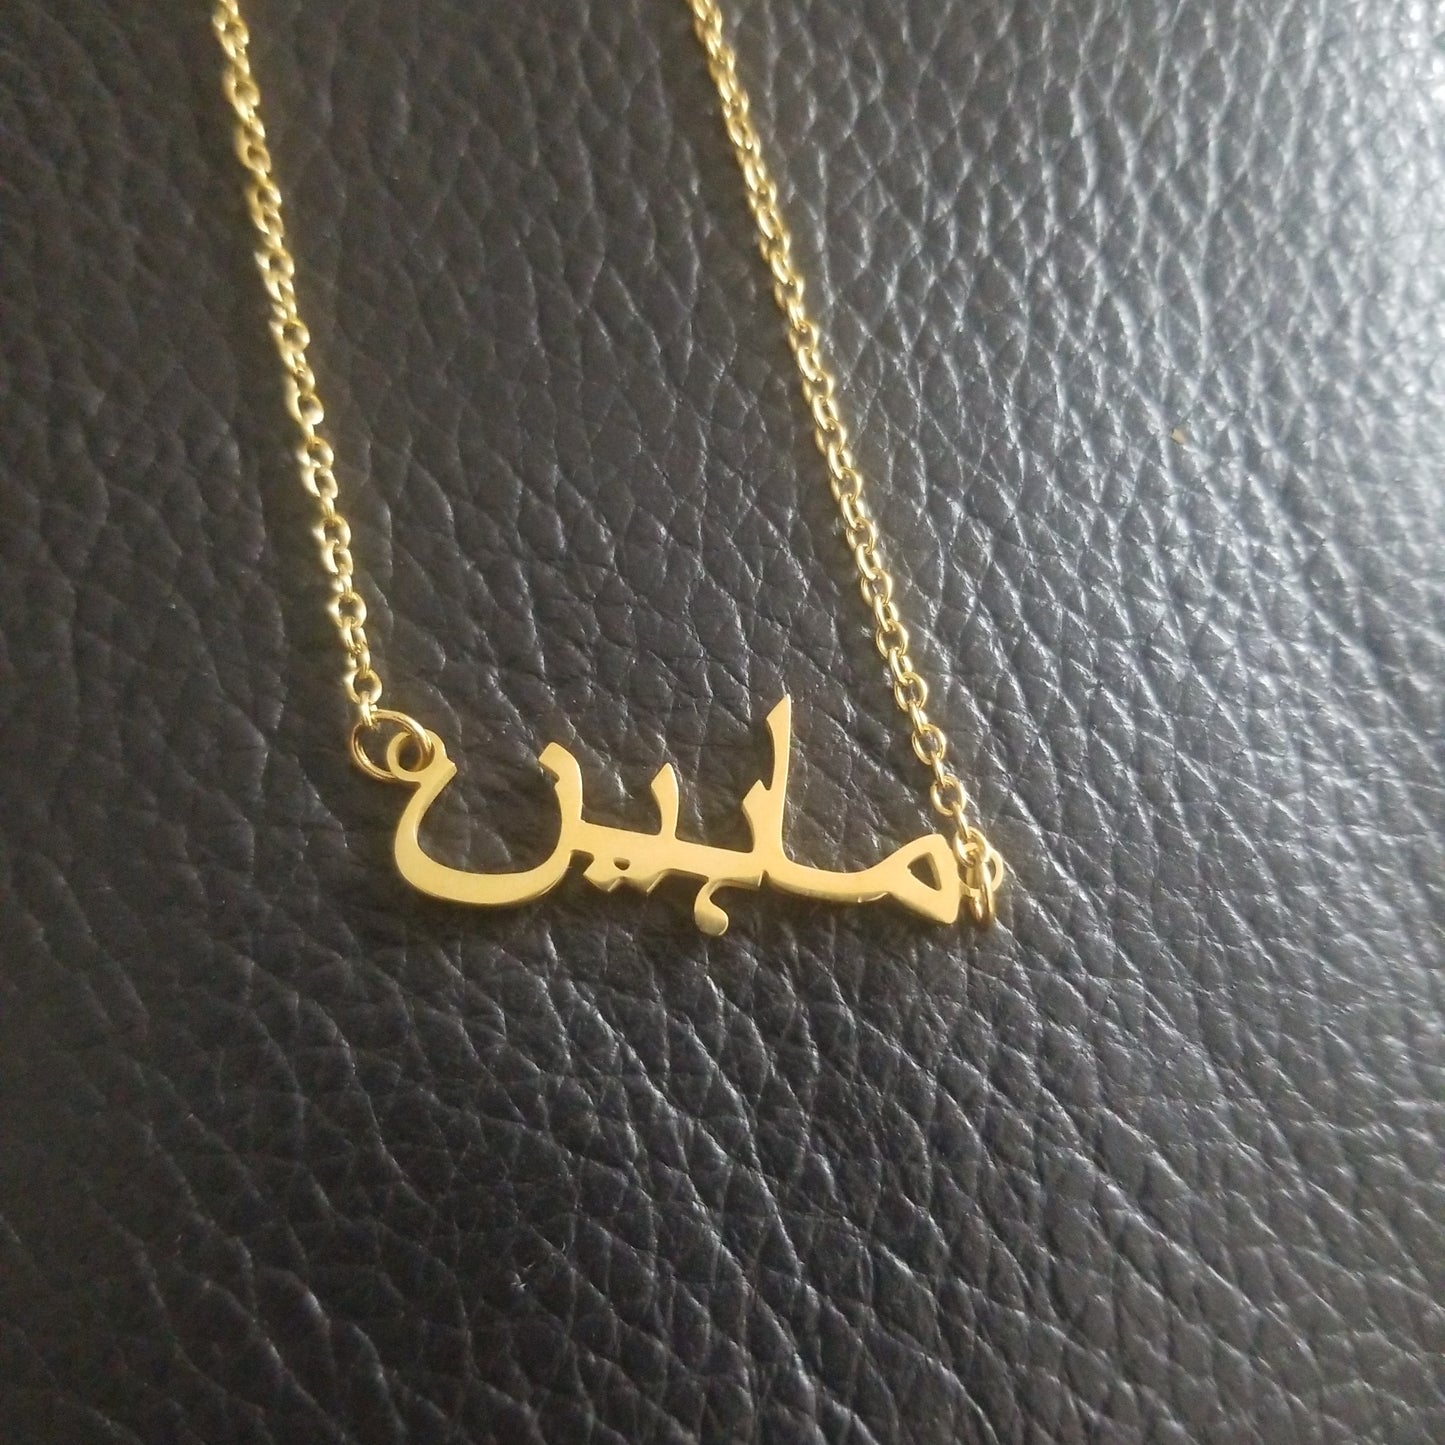 Ready Name Necklace - Names starting with A-G